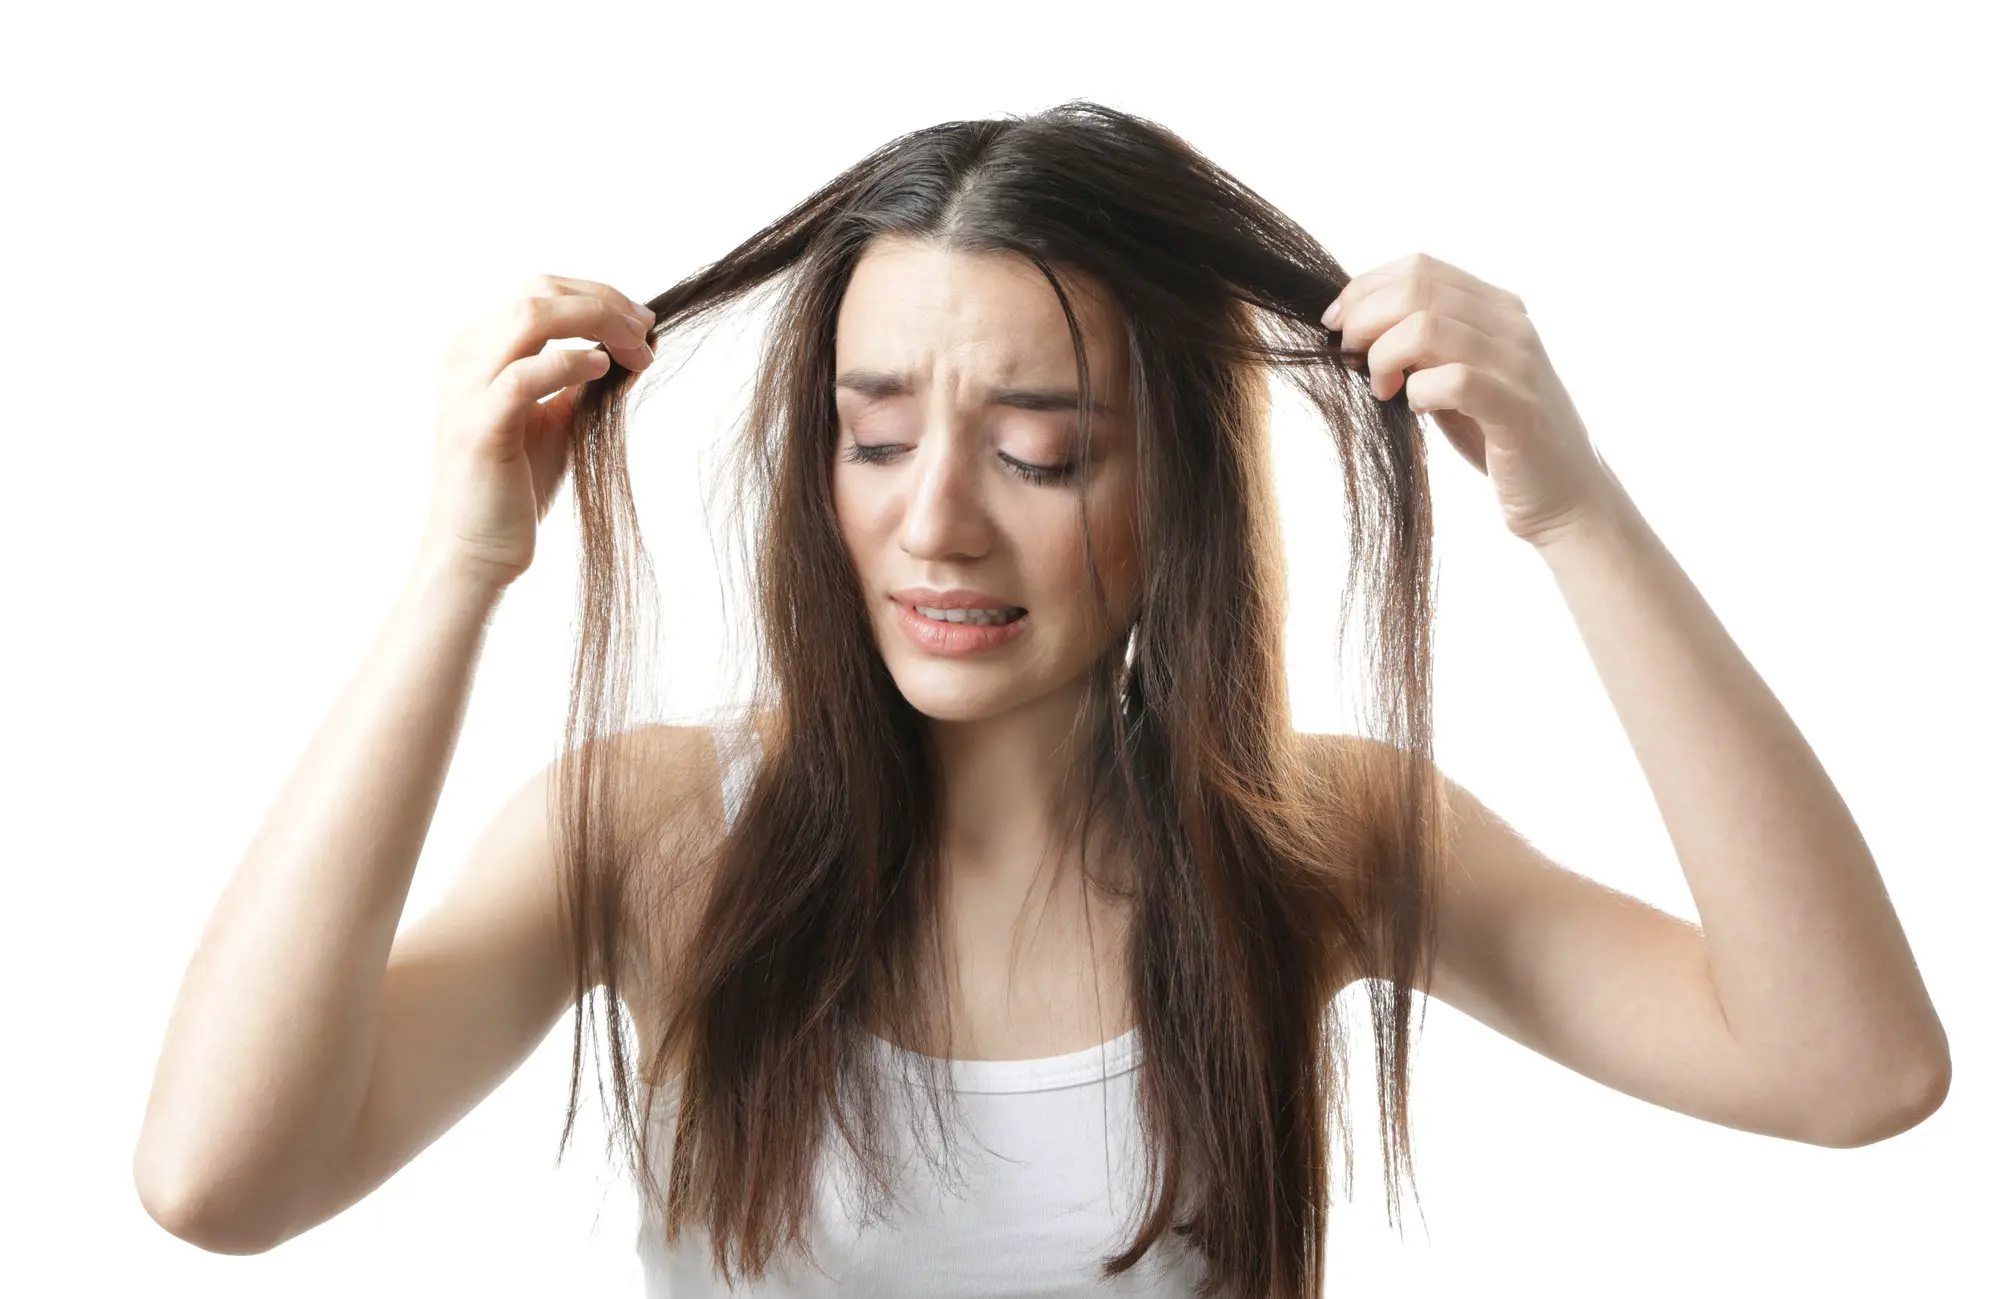 Depositphotos 147484377 l 2015 - Can Iron Deficiency Cause Hair Thinning?